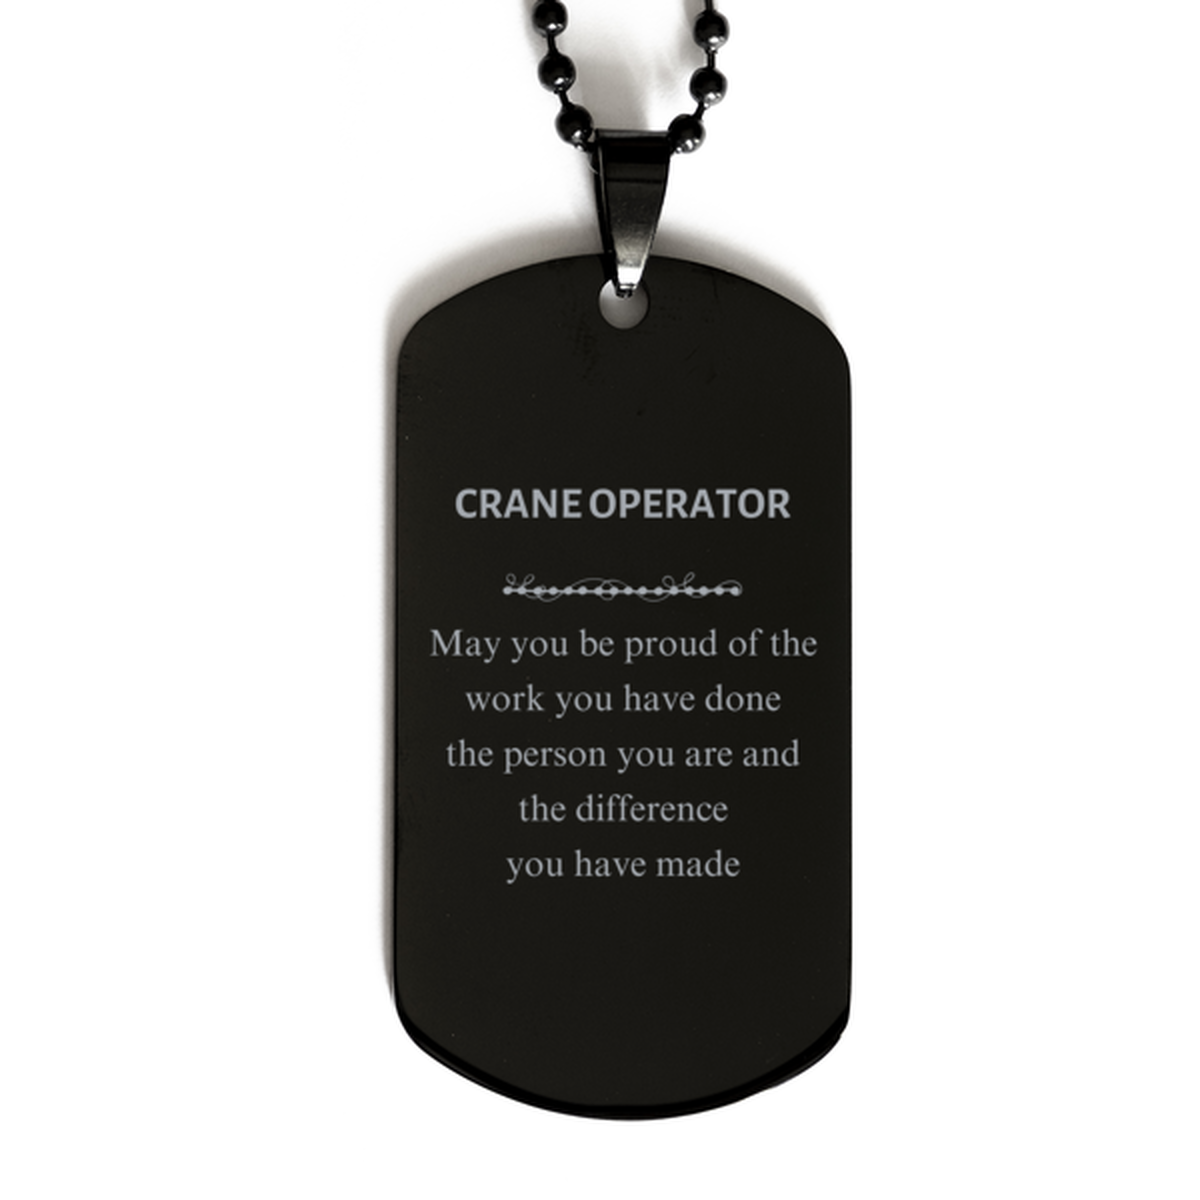 Crane Operator May you be proud of the work you have done, Retirement Crane Operator Black Dog Tag for Colleague Appreciation Gifts Amazing for Crane Operator